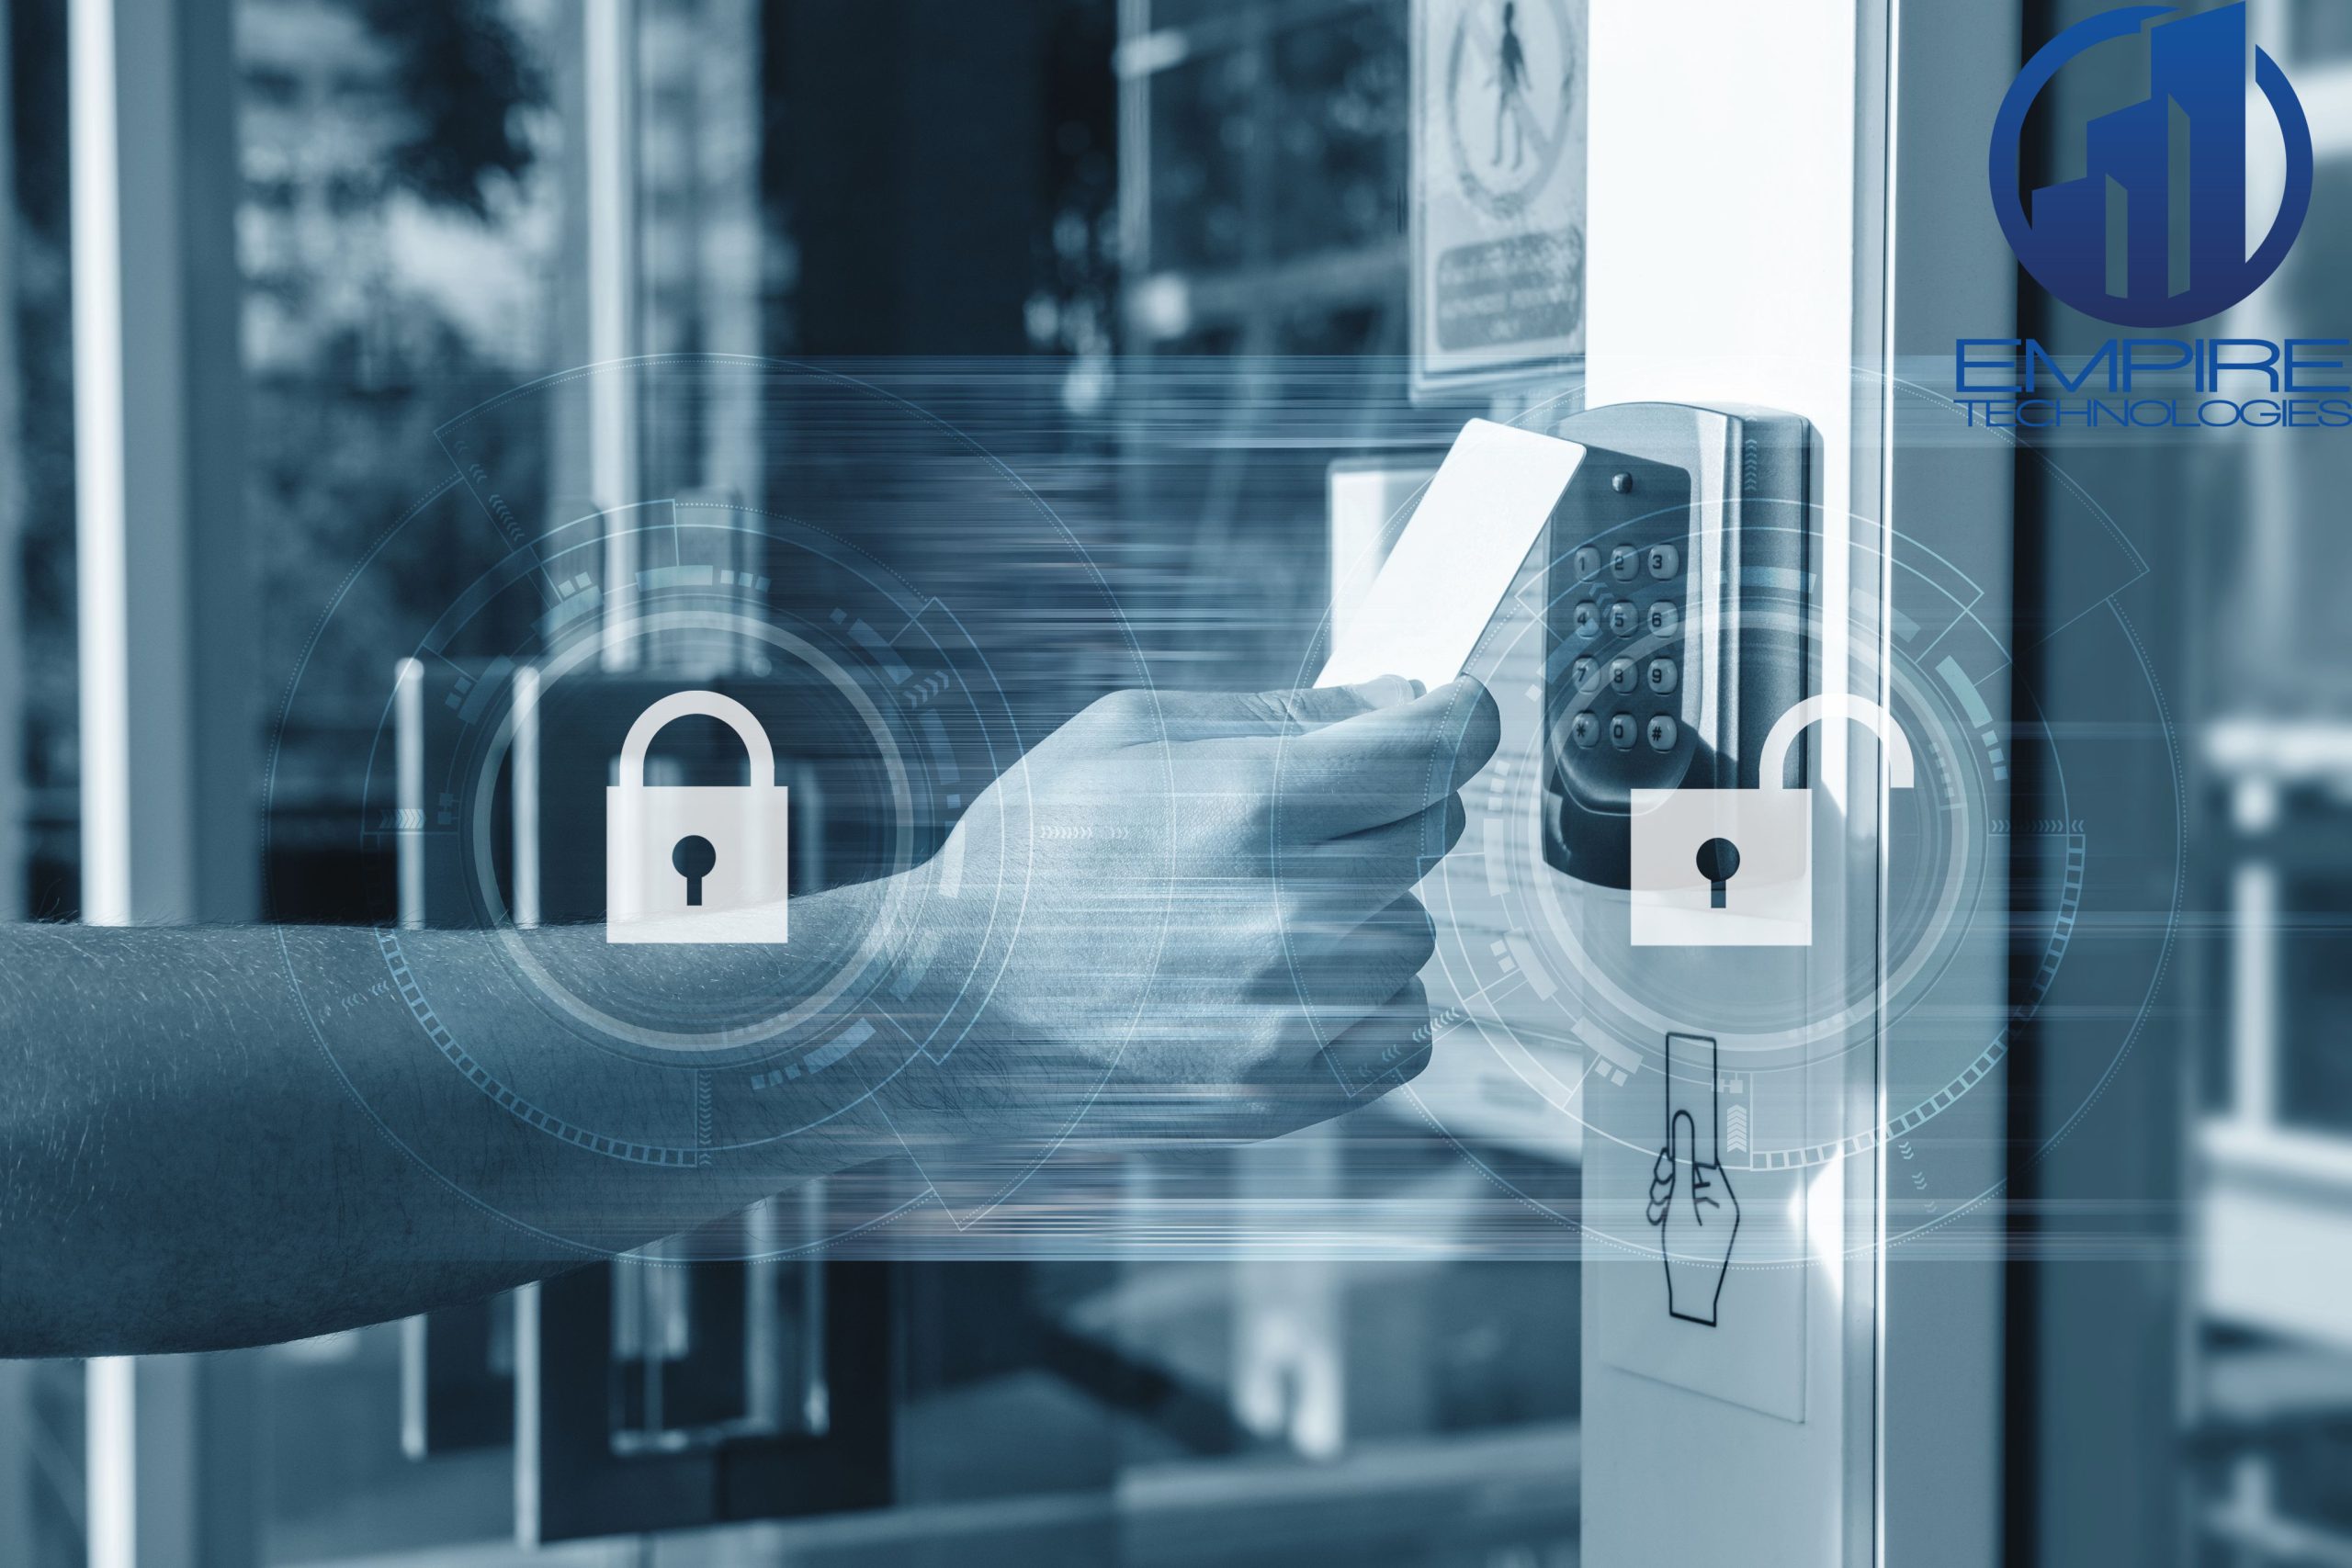 Access Control System Installation: Securing Keys, Assets, and People